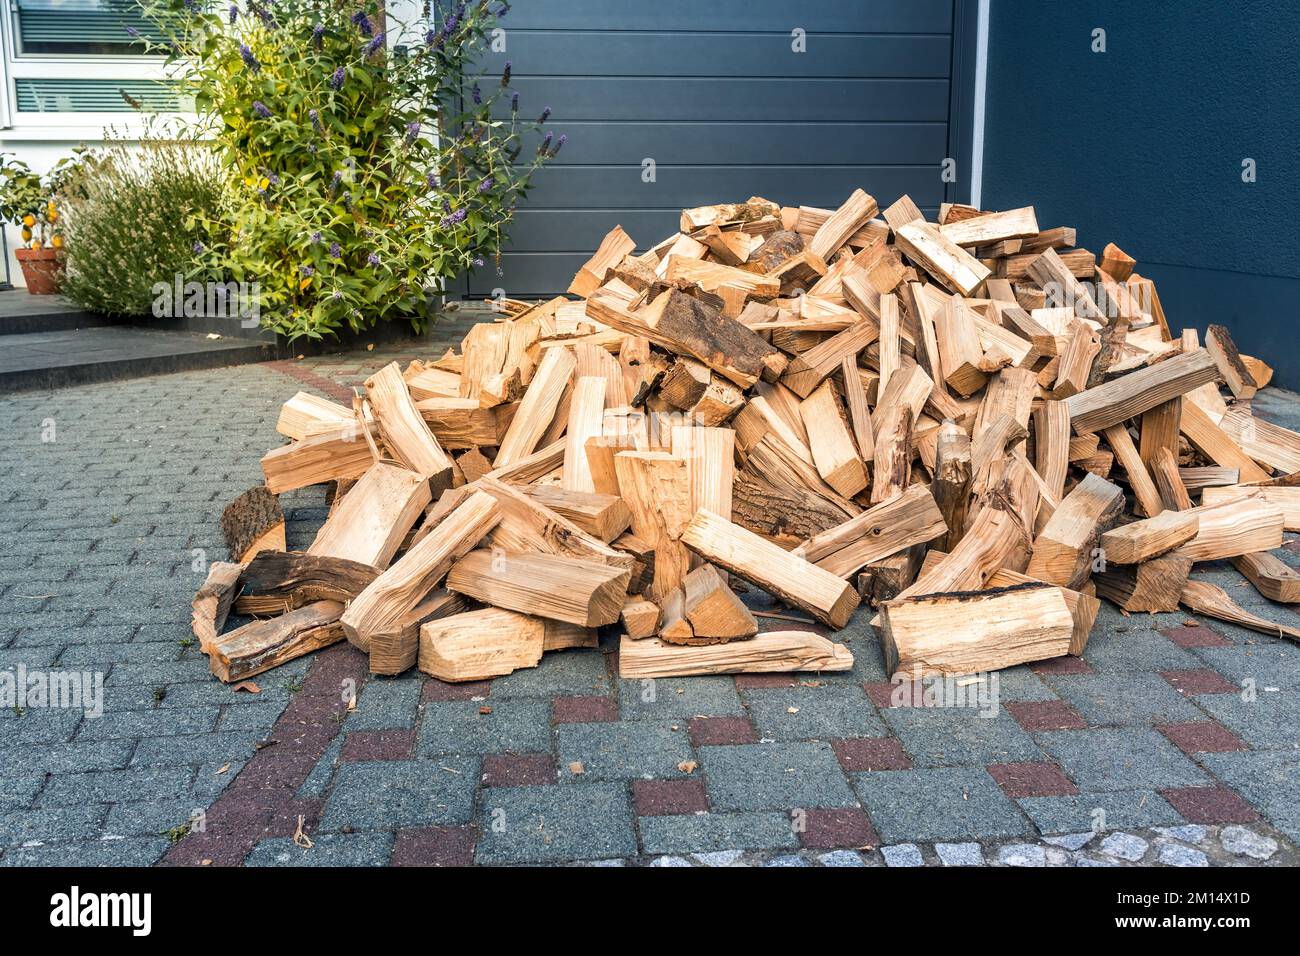 A pile of stacked firewood, prepared for heating the house.  Firewood harvested for heating in winter Stock Photo